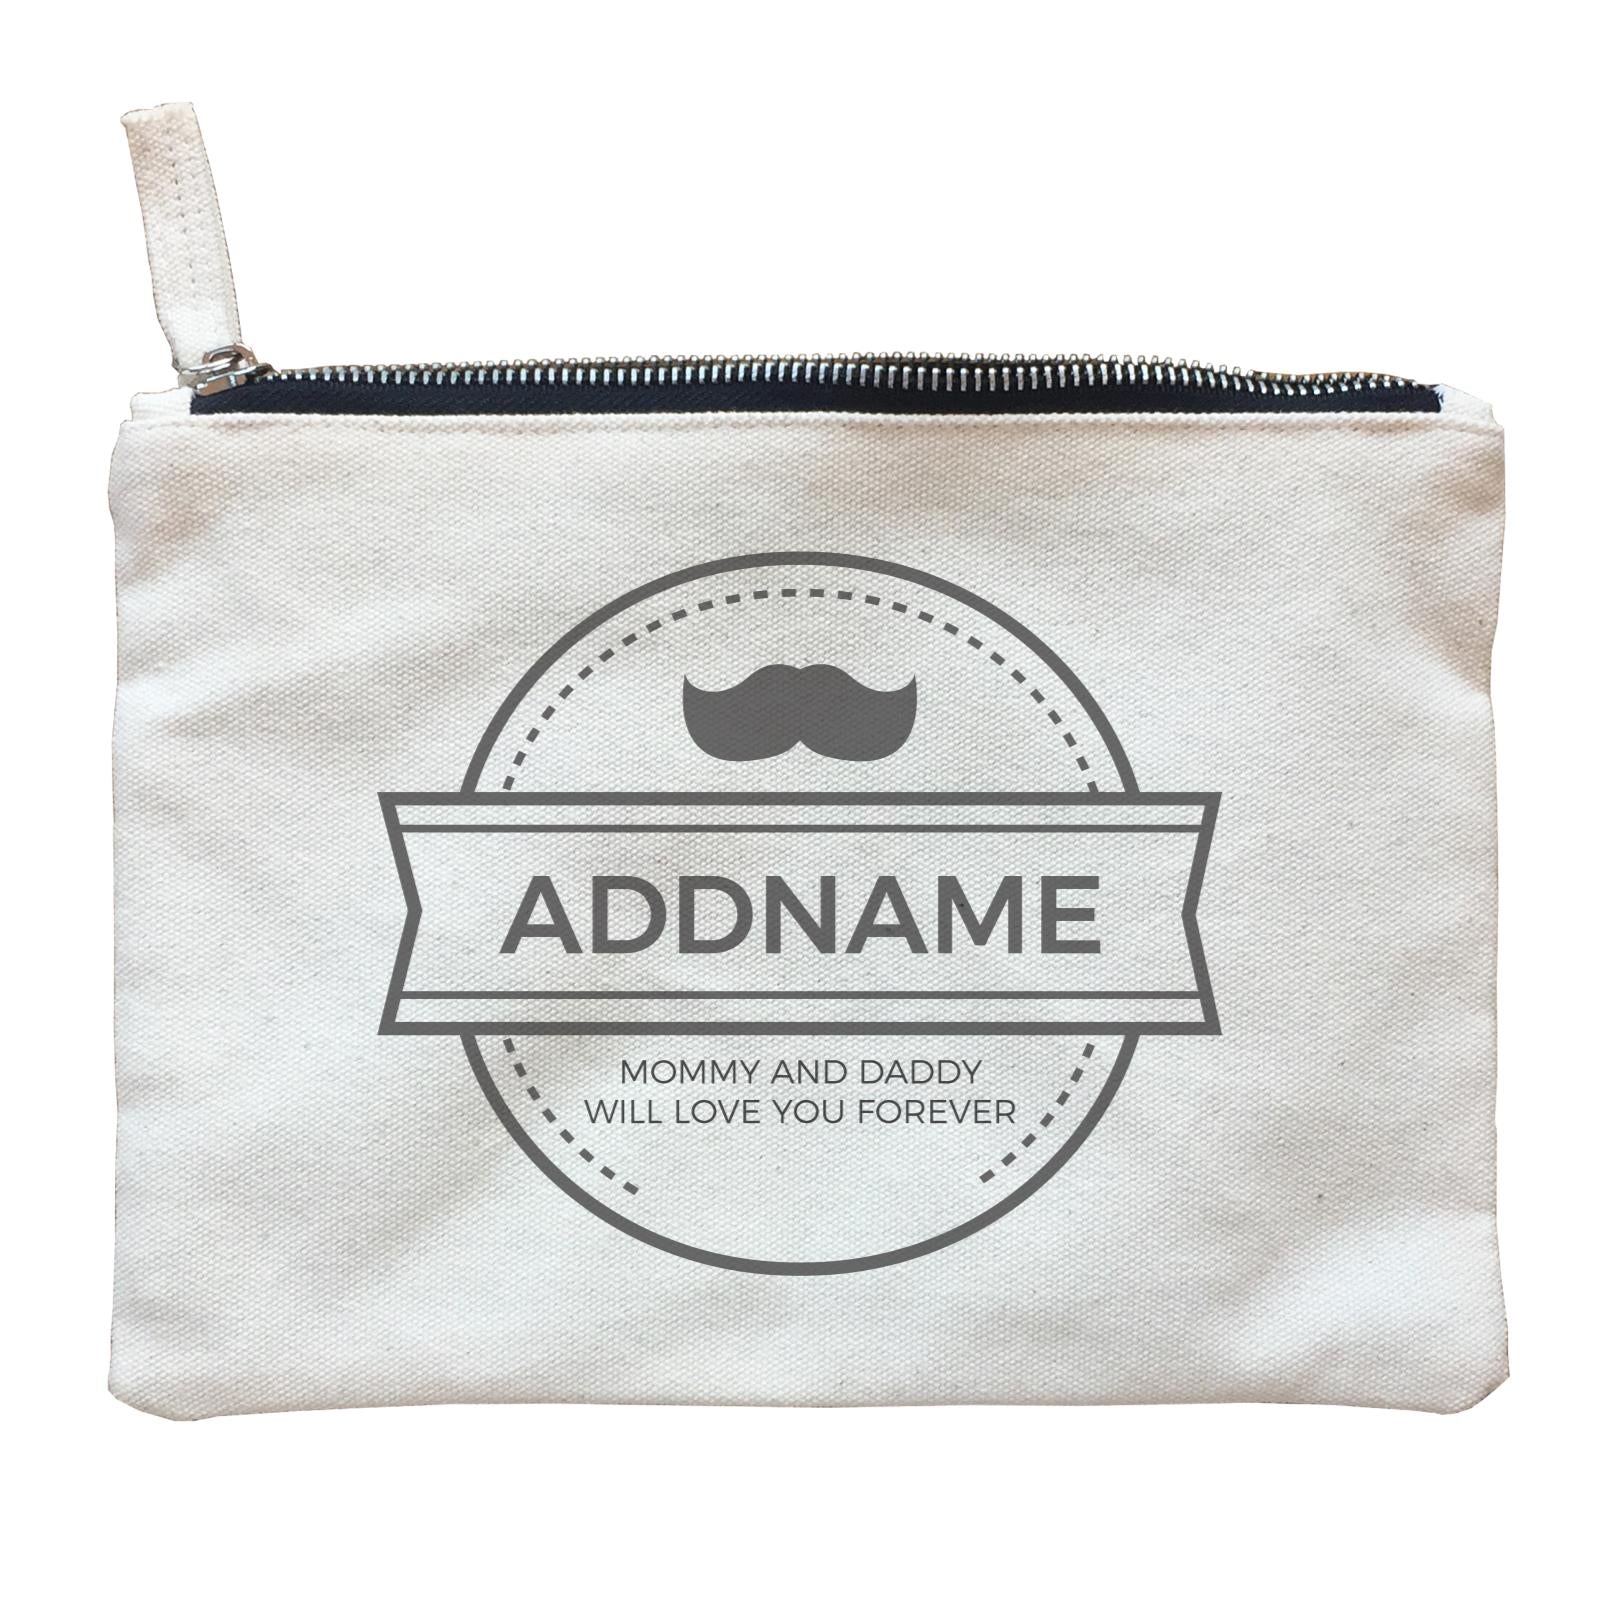 Moustache Emblem Personalizable with Name and Text Zipper Pouch